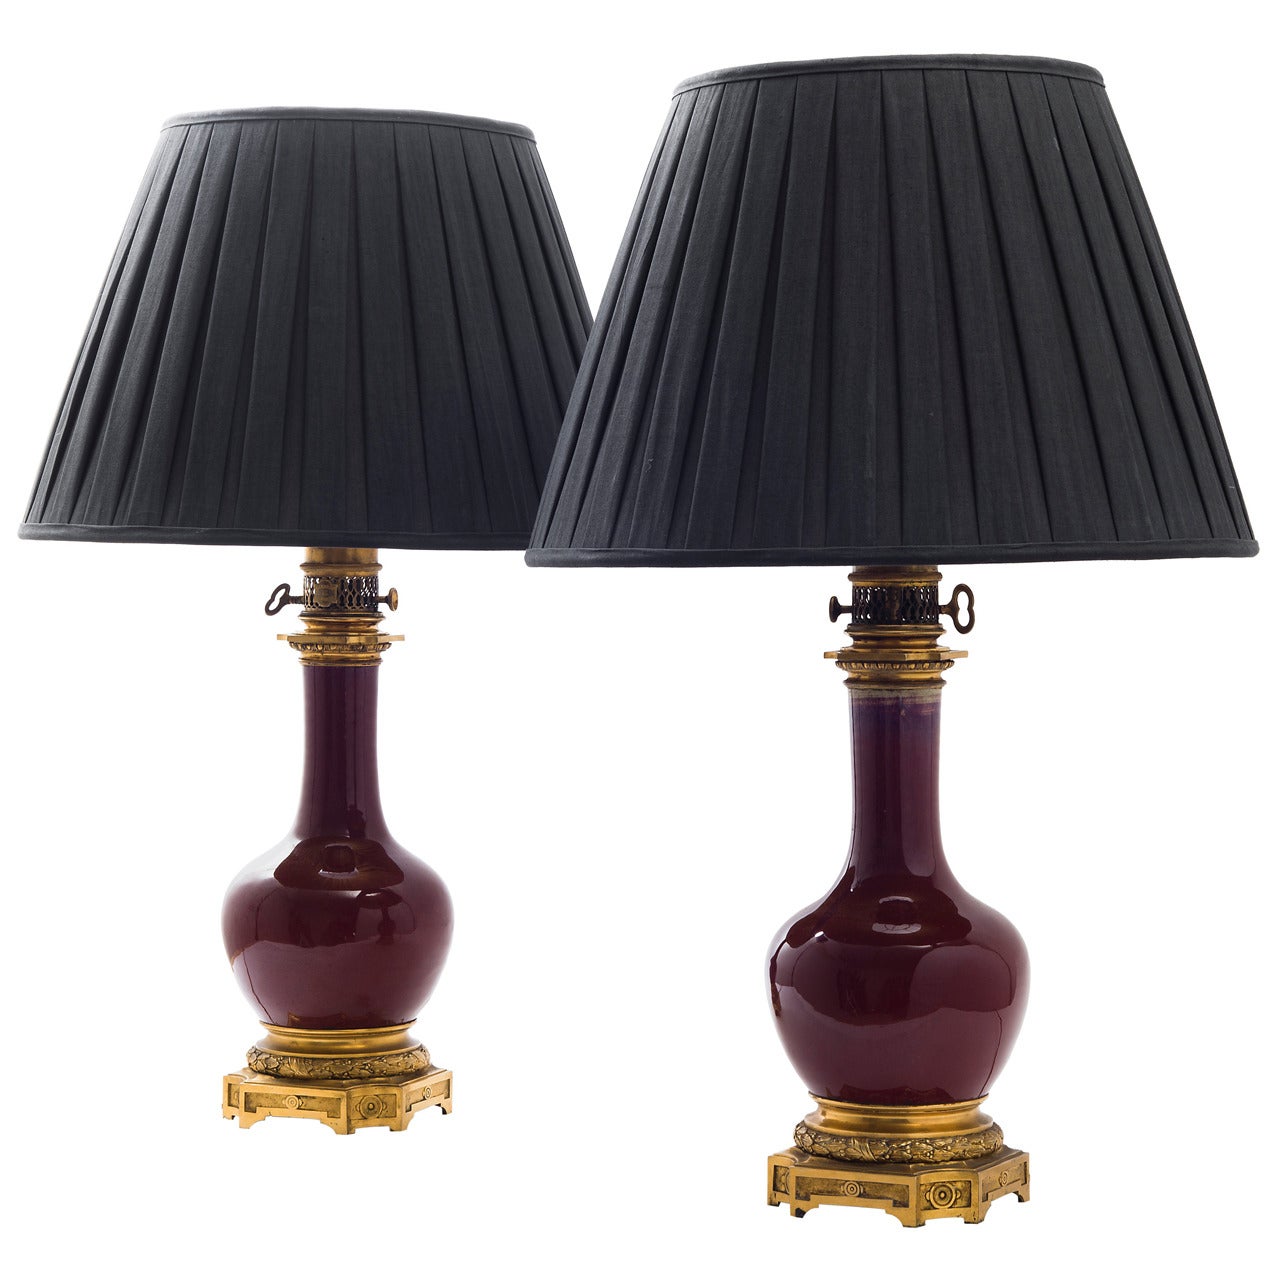 Pair of Bronze-Mounted Oxblood Vase Lamps by Gagneau of Paris, circa 1870